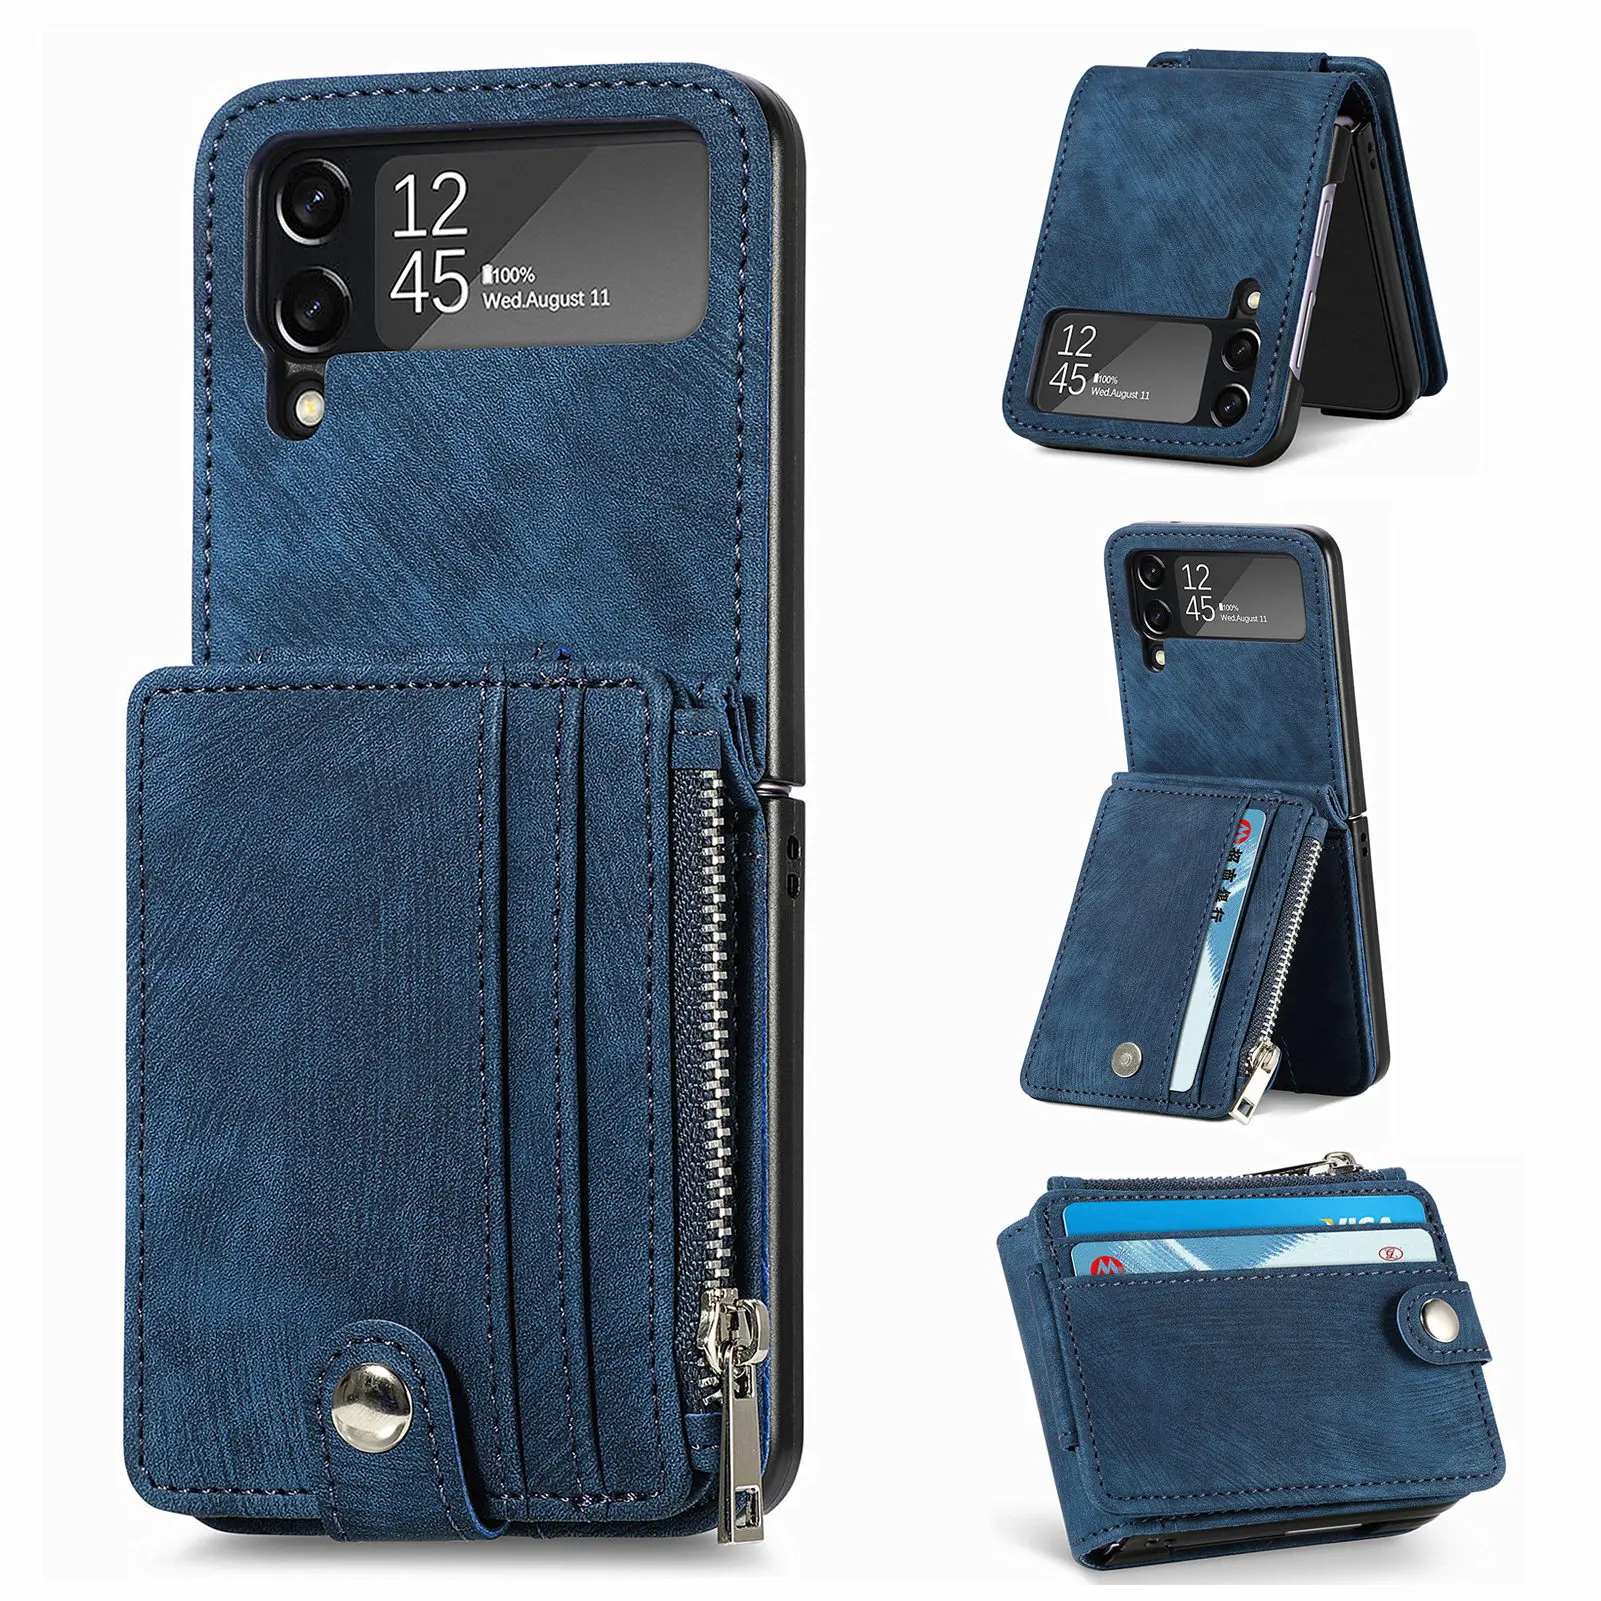 iTien Luxury Protection Premium Flip Leather Cover Phone Wallet Case For  Swissvoice G50 5 inch Pouch Shell Etui Skin - AliExpress